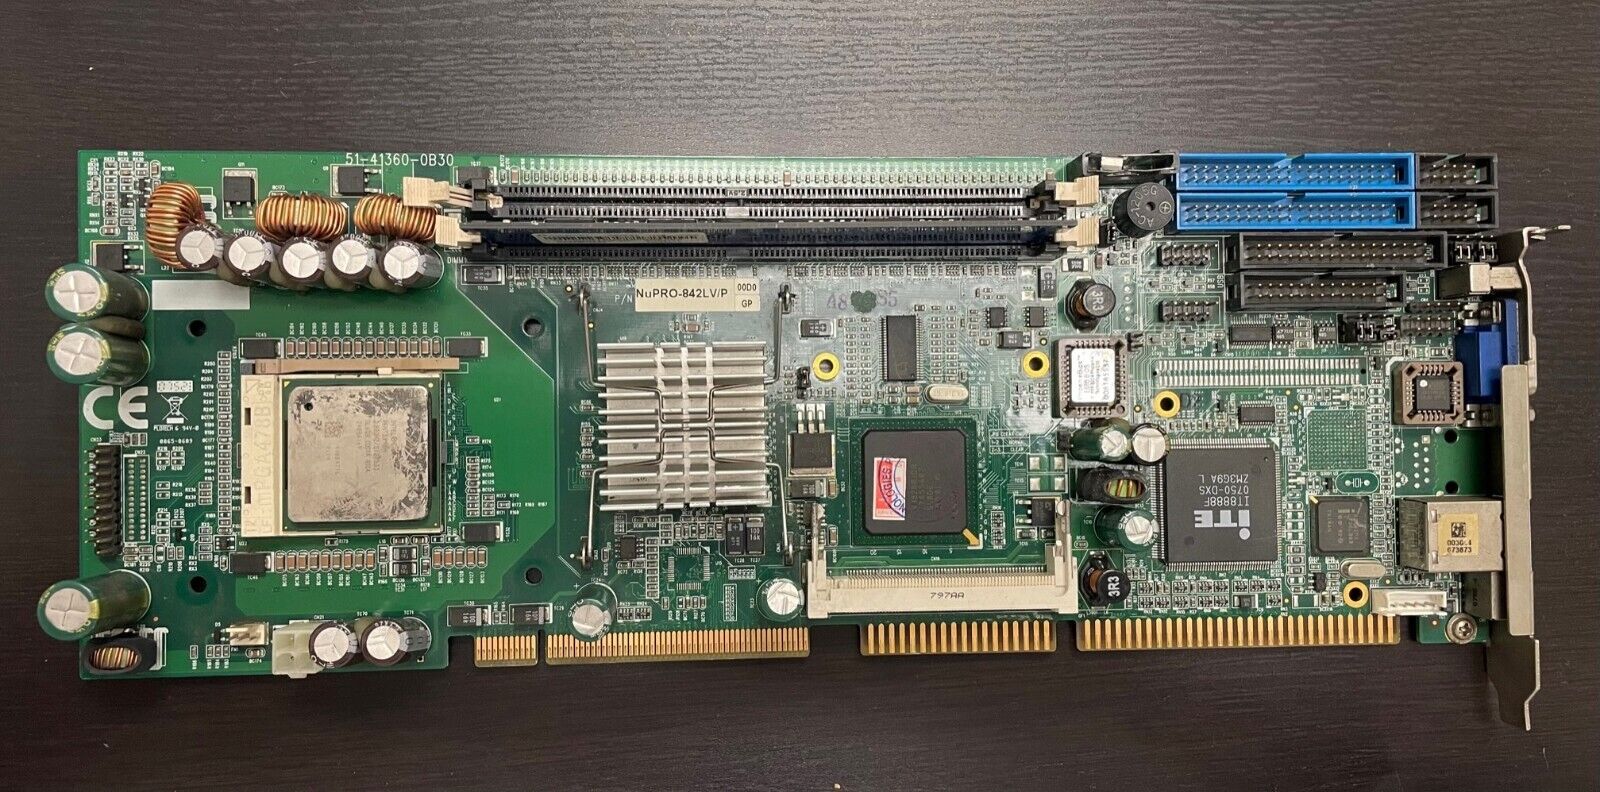 1PC USED ADLINK motherboard NuPRO-842LV/P